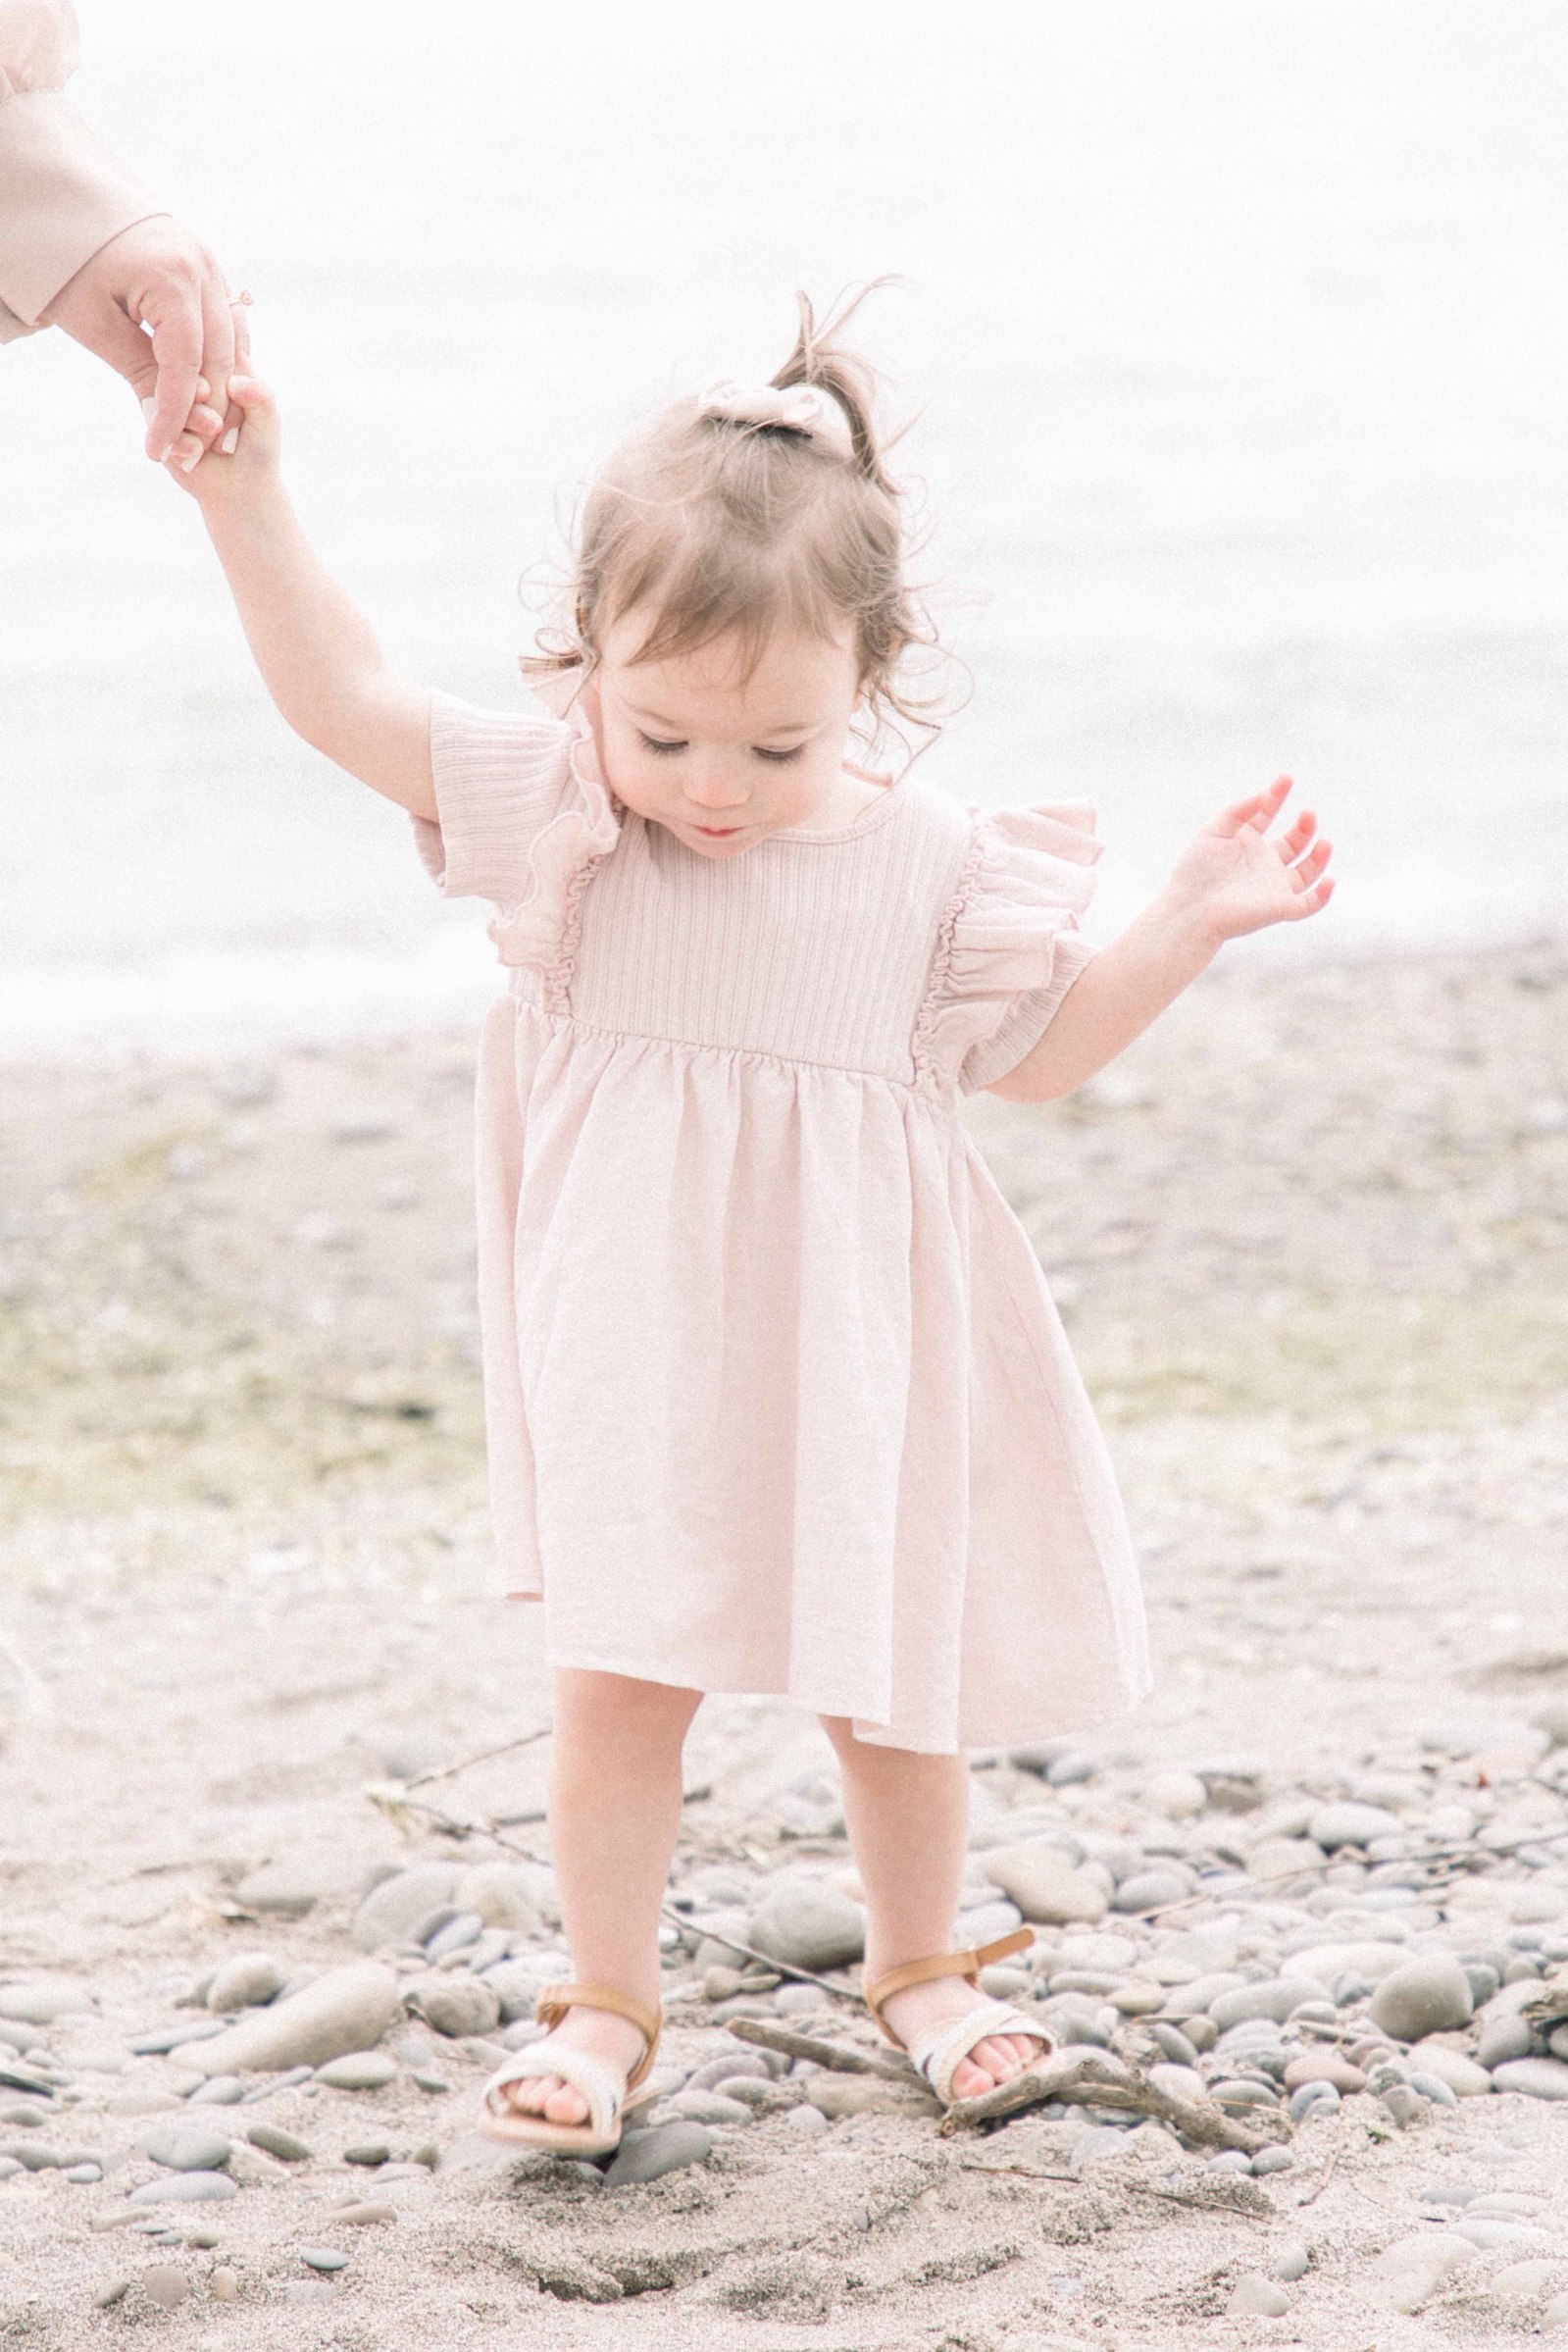 Portrait little girl holding her mother's hand on the beach, Niagara Portrait Photographer, Niagara Family Photographer, Niagara Motherhood Photography, Beach Portrait Photography, Emily VanderBeek Photography.